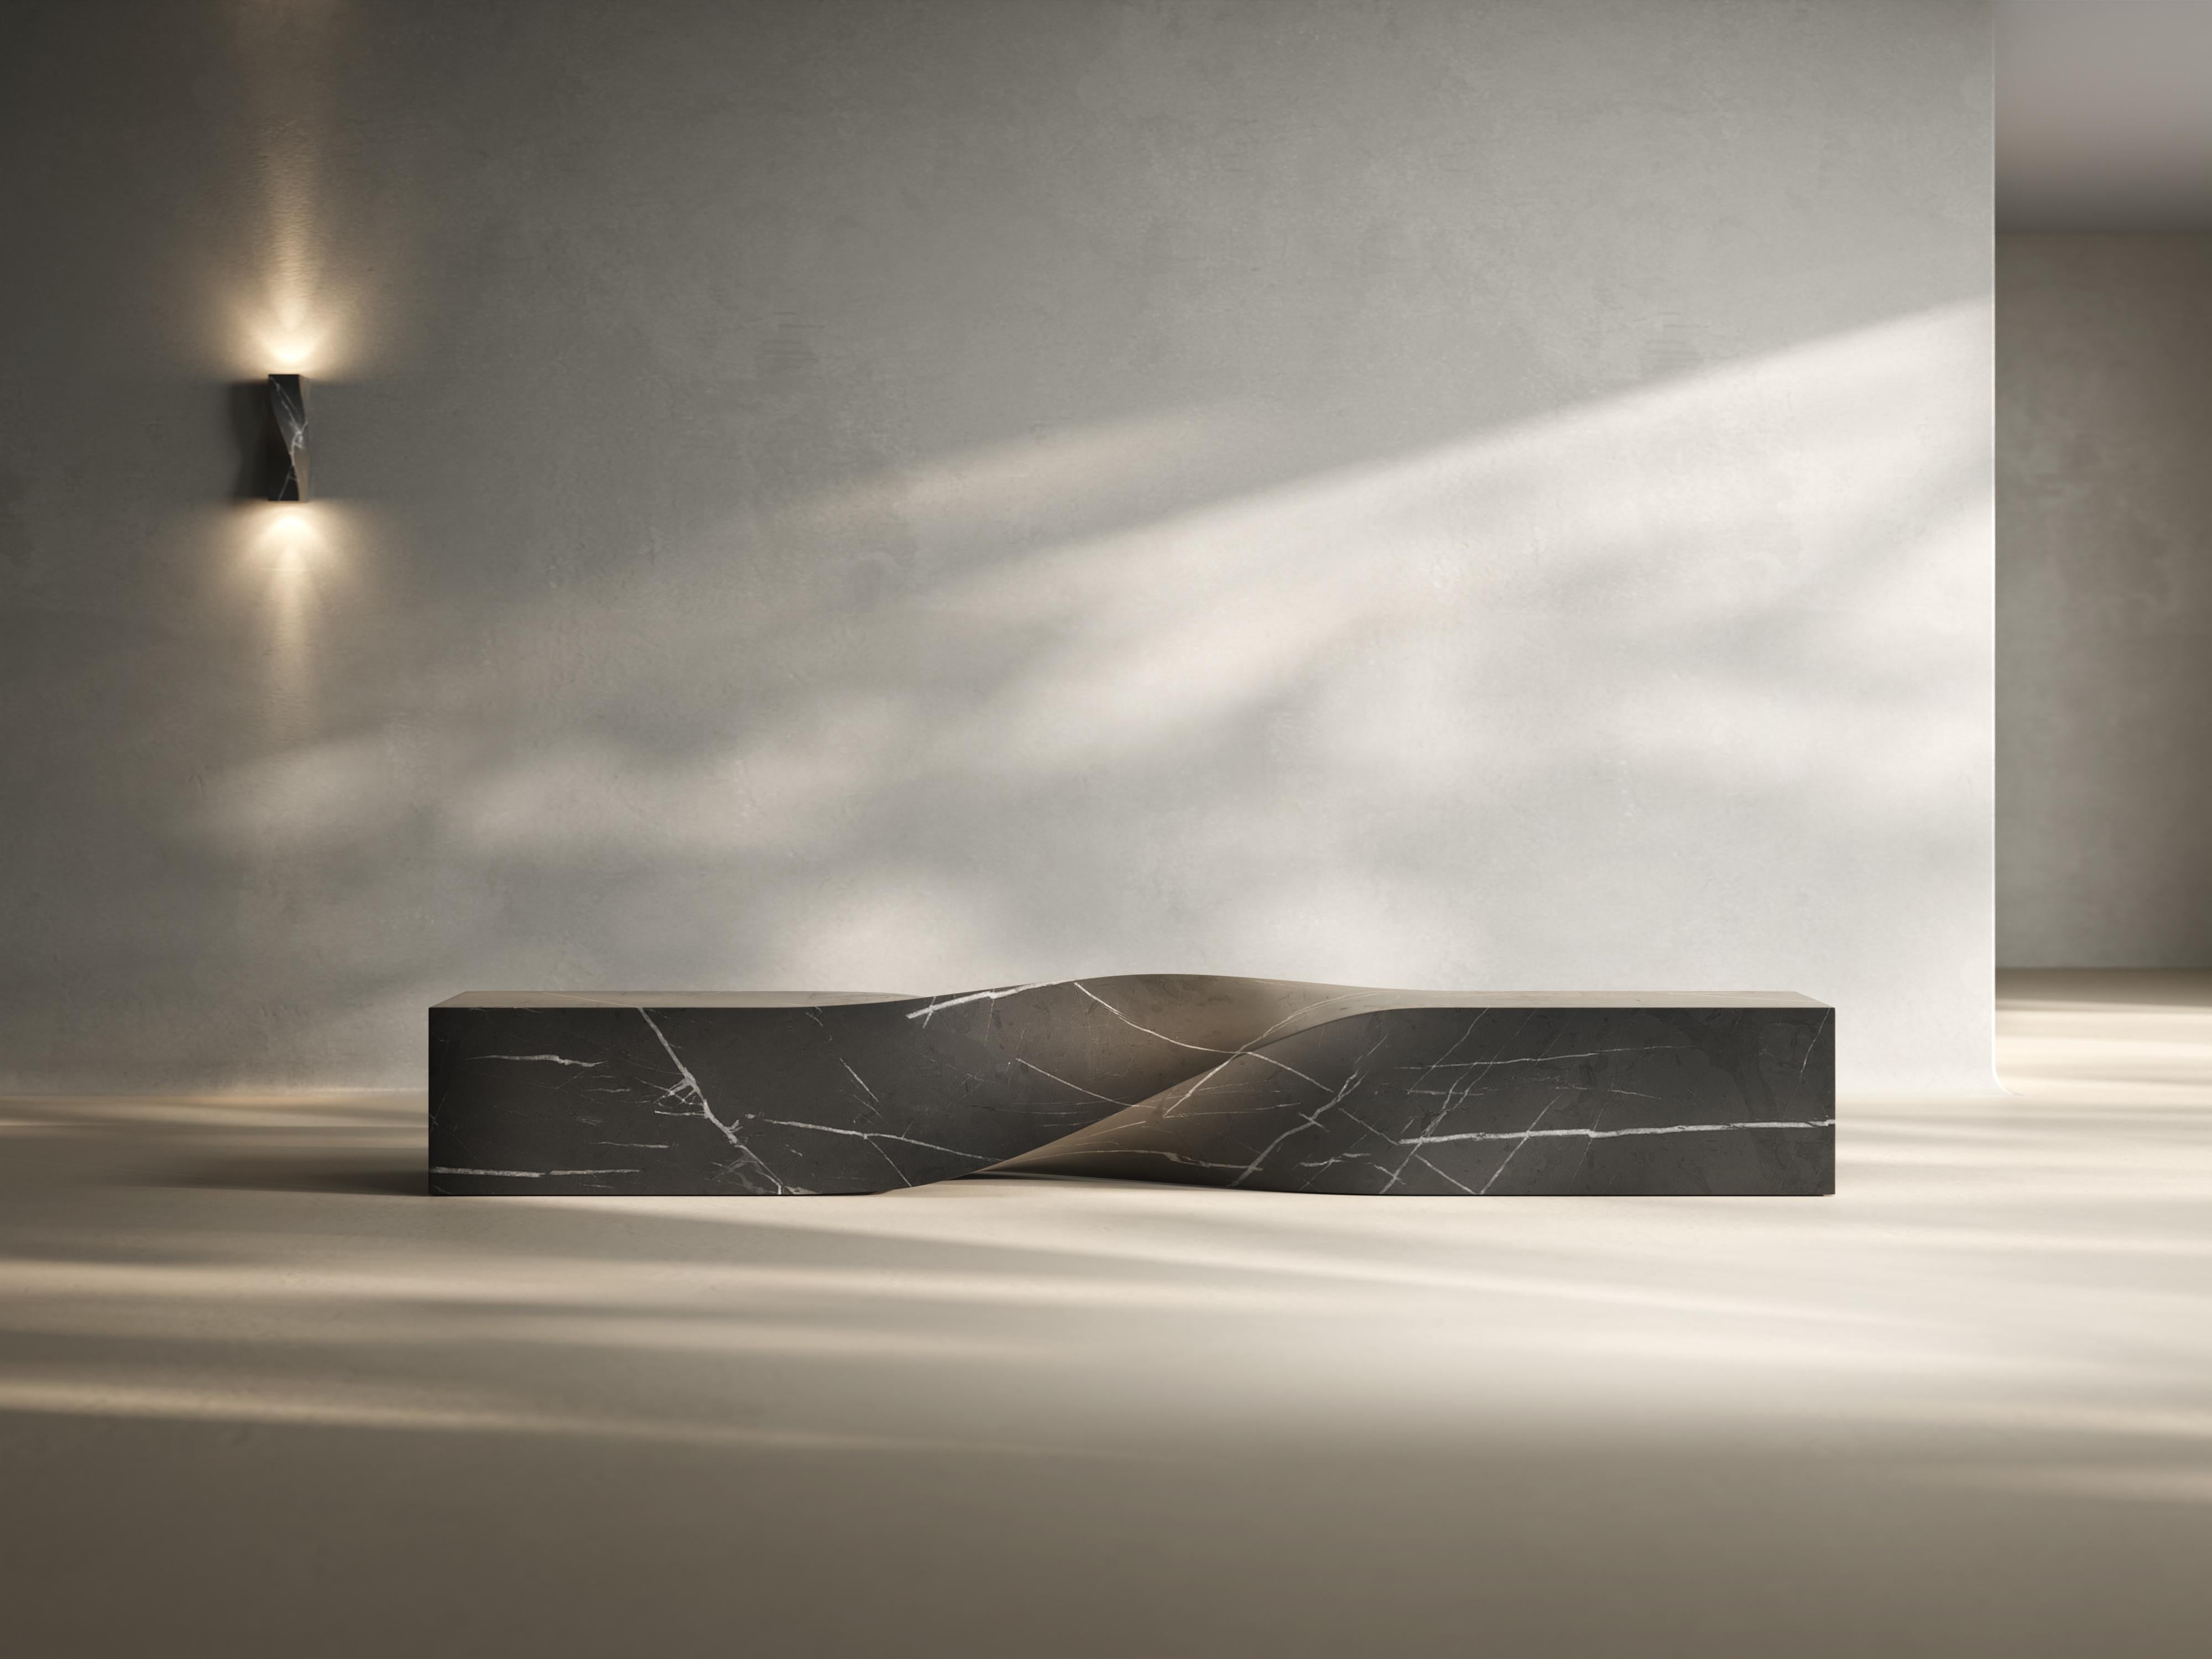 Soul sculpture marble bench medium by Veronica Mar
Dimensions: D 250 x W 57 x H 51 cm. SH: 45 cm.
Materials: Marble Green Macael

It is available in 2.5 meters & 3 meters long, Made in KRION® in Limited Editions. Different colors in KRION® have